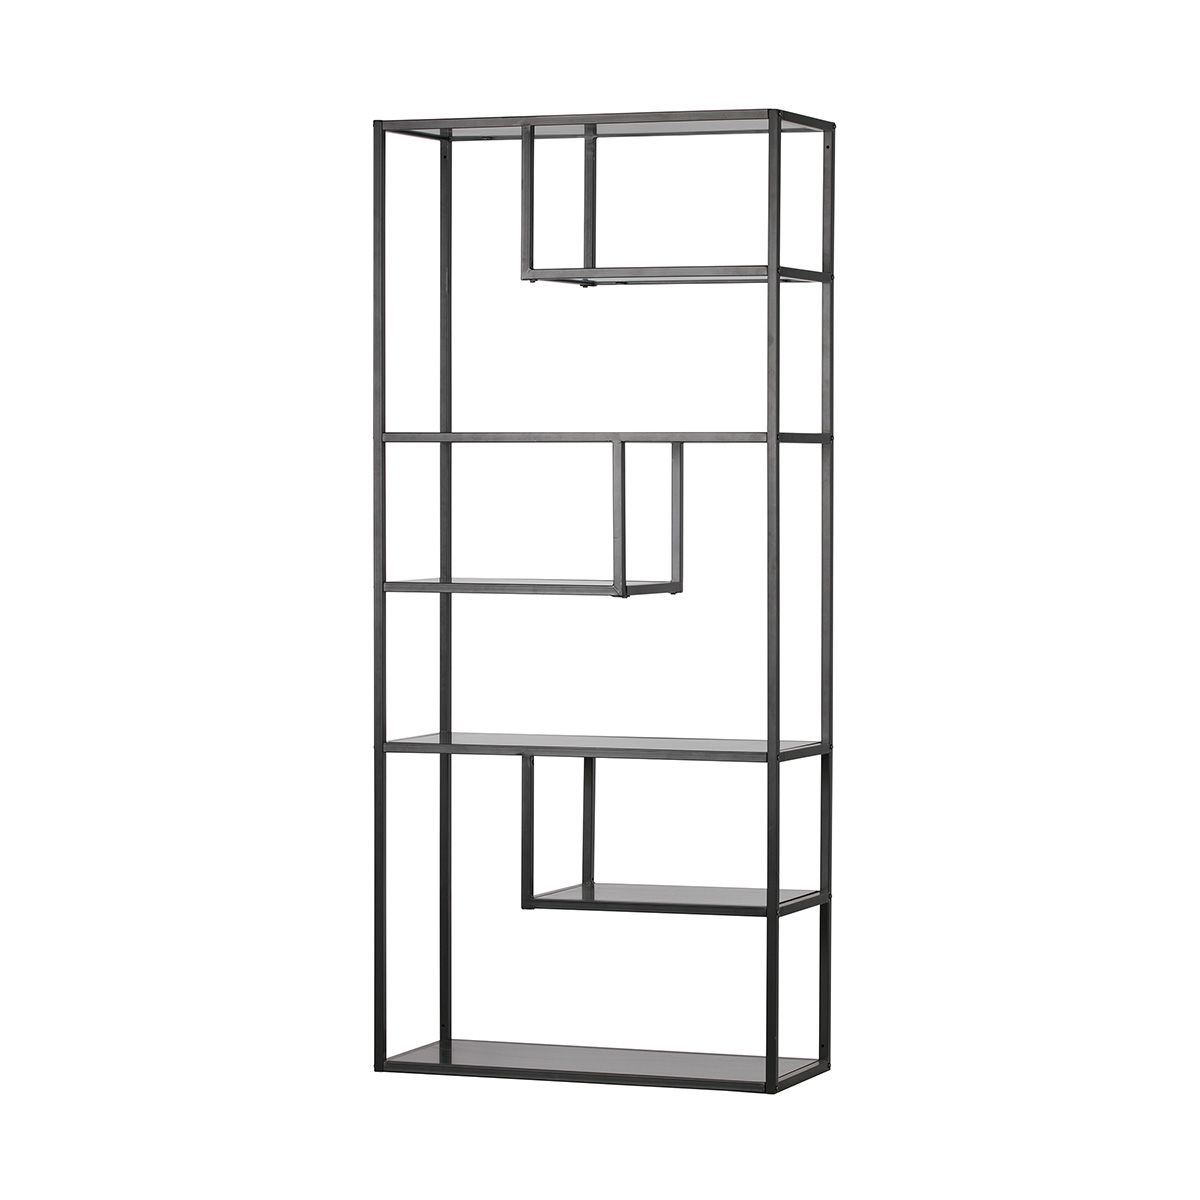 Teun black – by Made bookcase shelf Woood Decoclico metal